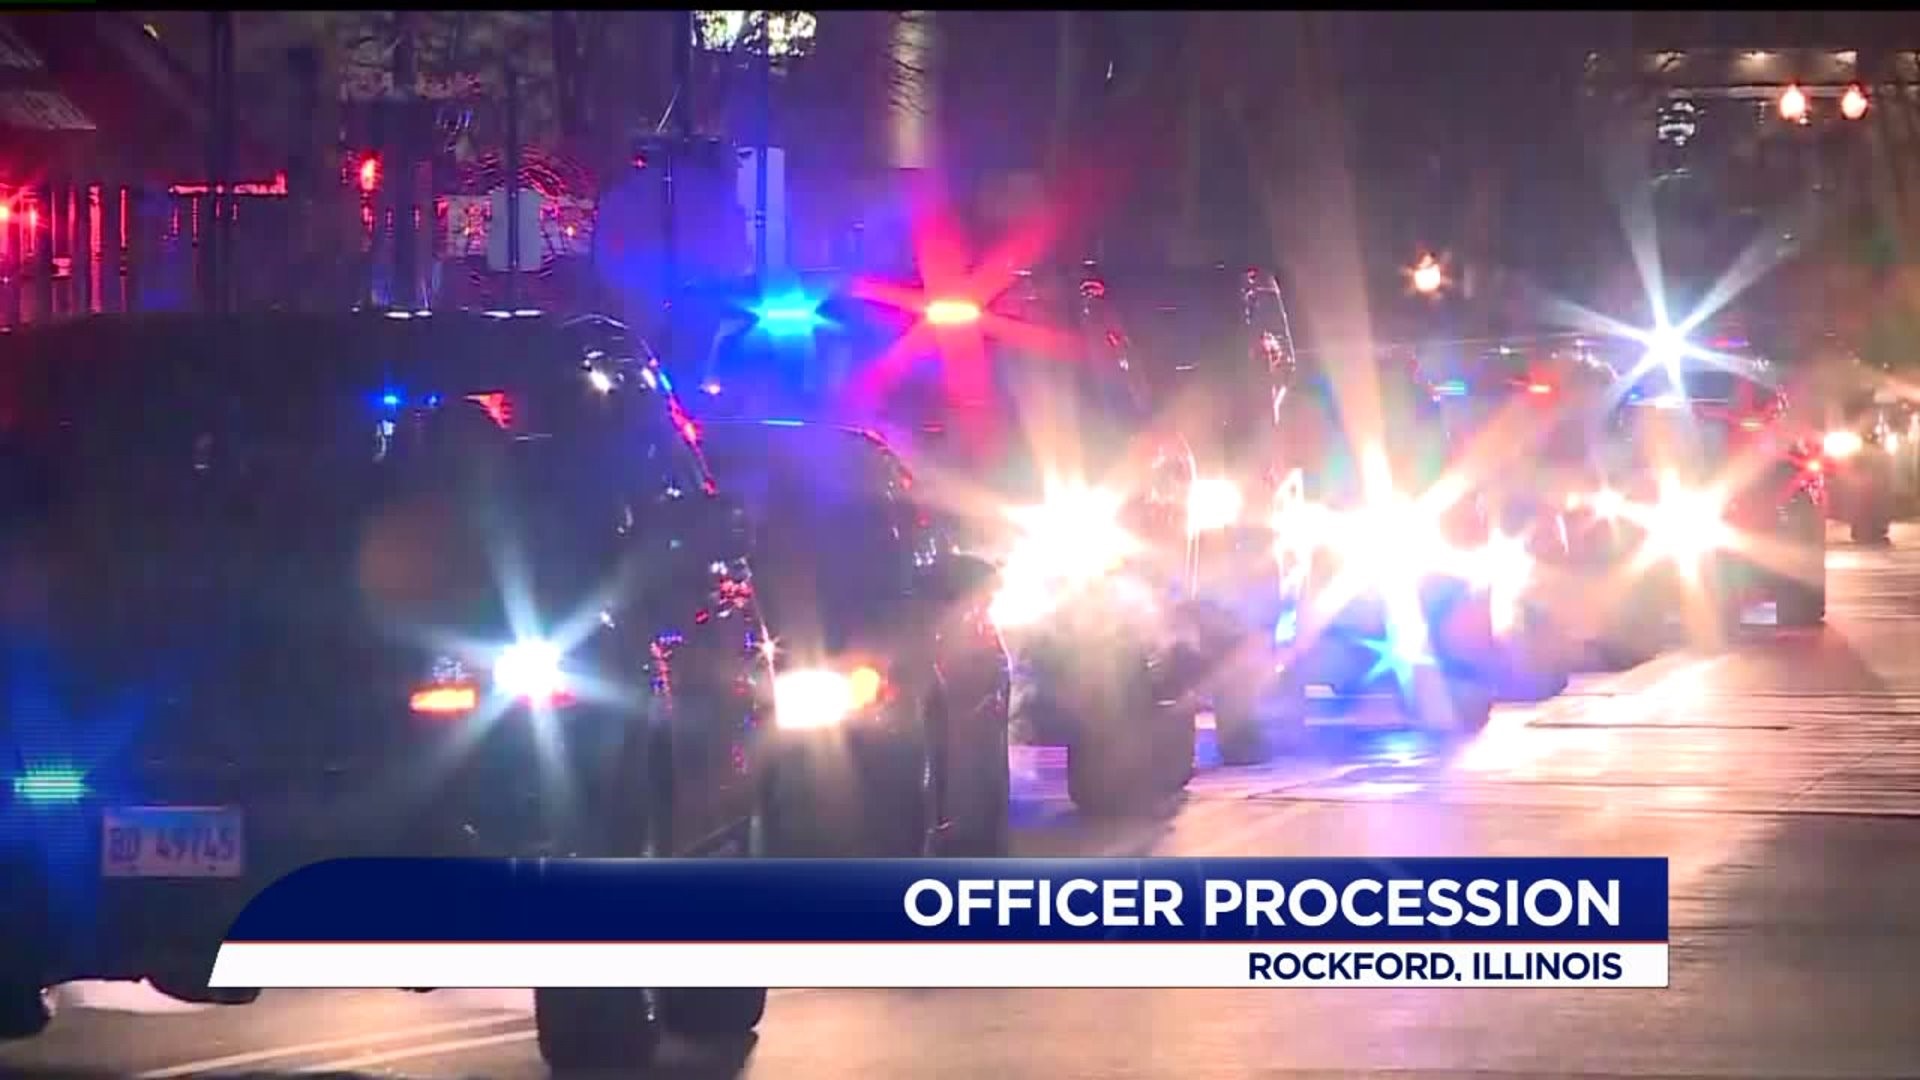 Law enforcement join together to escort fallen officer in Rockford shooting